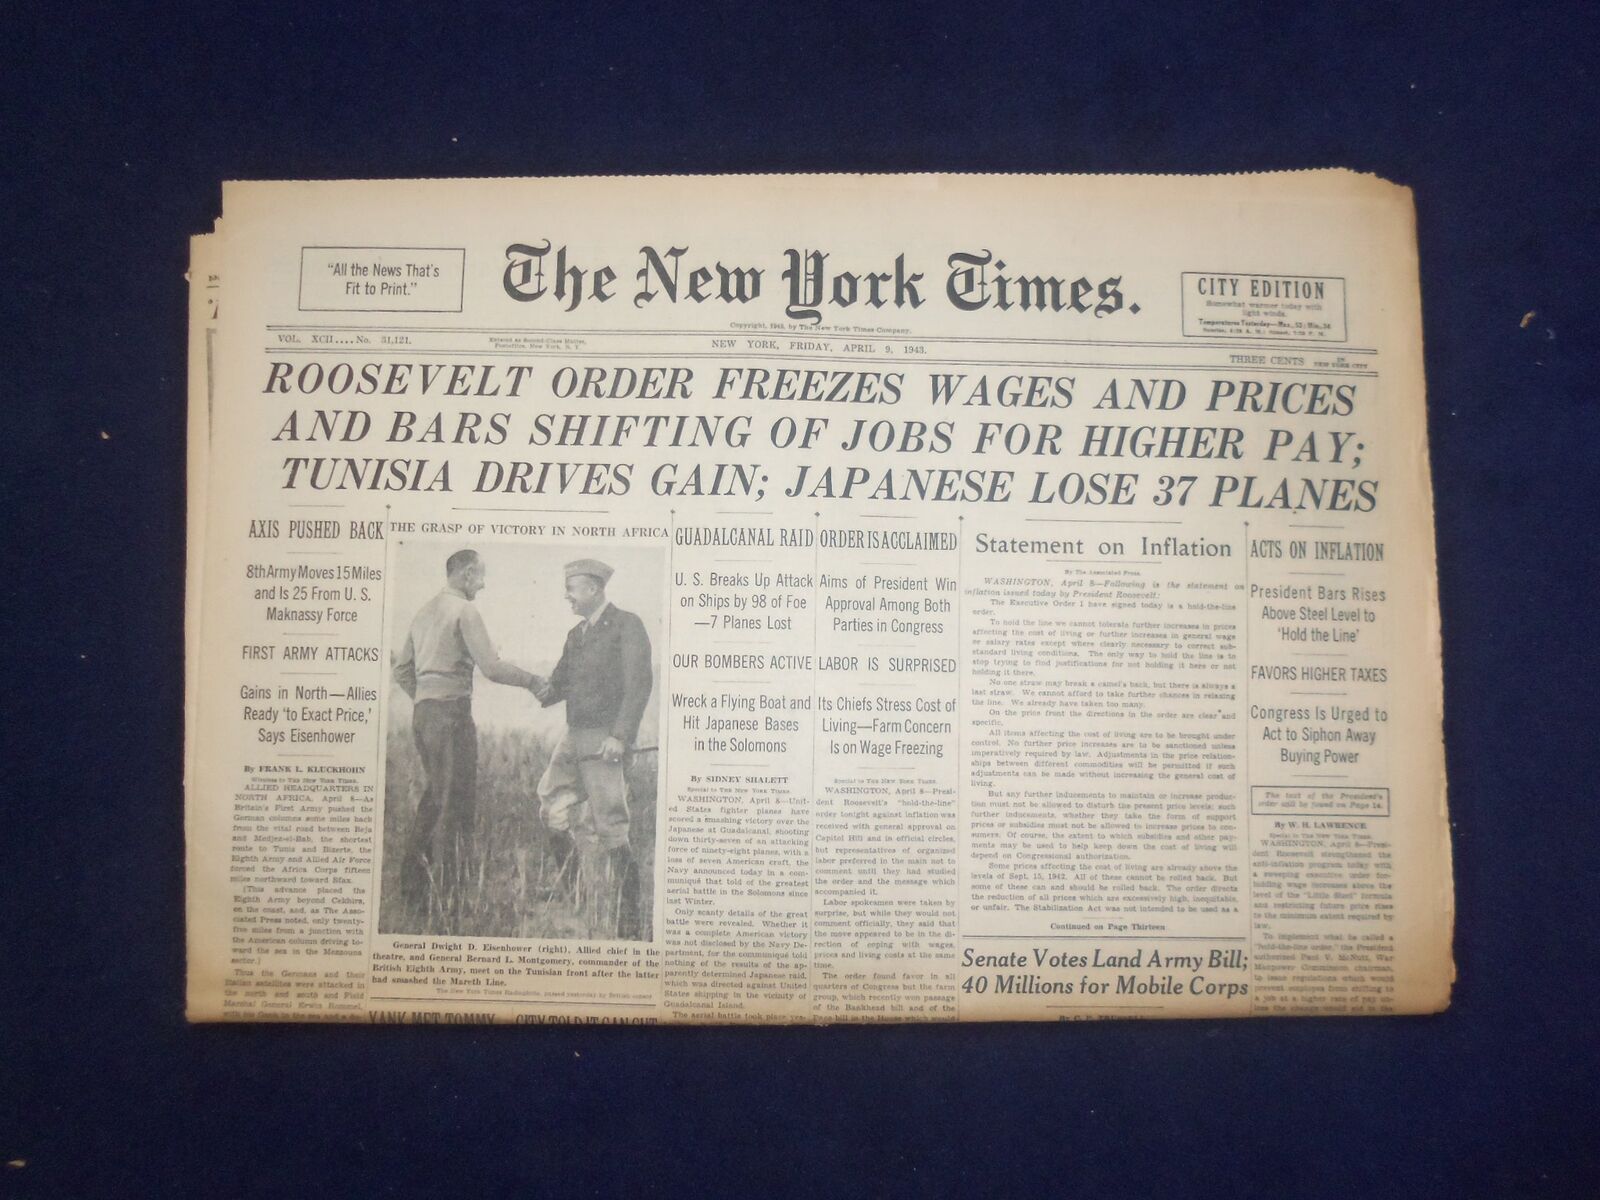 1943 APR 9 NEW YORK TIMES - ROOSEVELT ORDER FREEZES WAGES AND PRICES - NP 6529